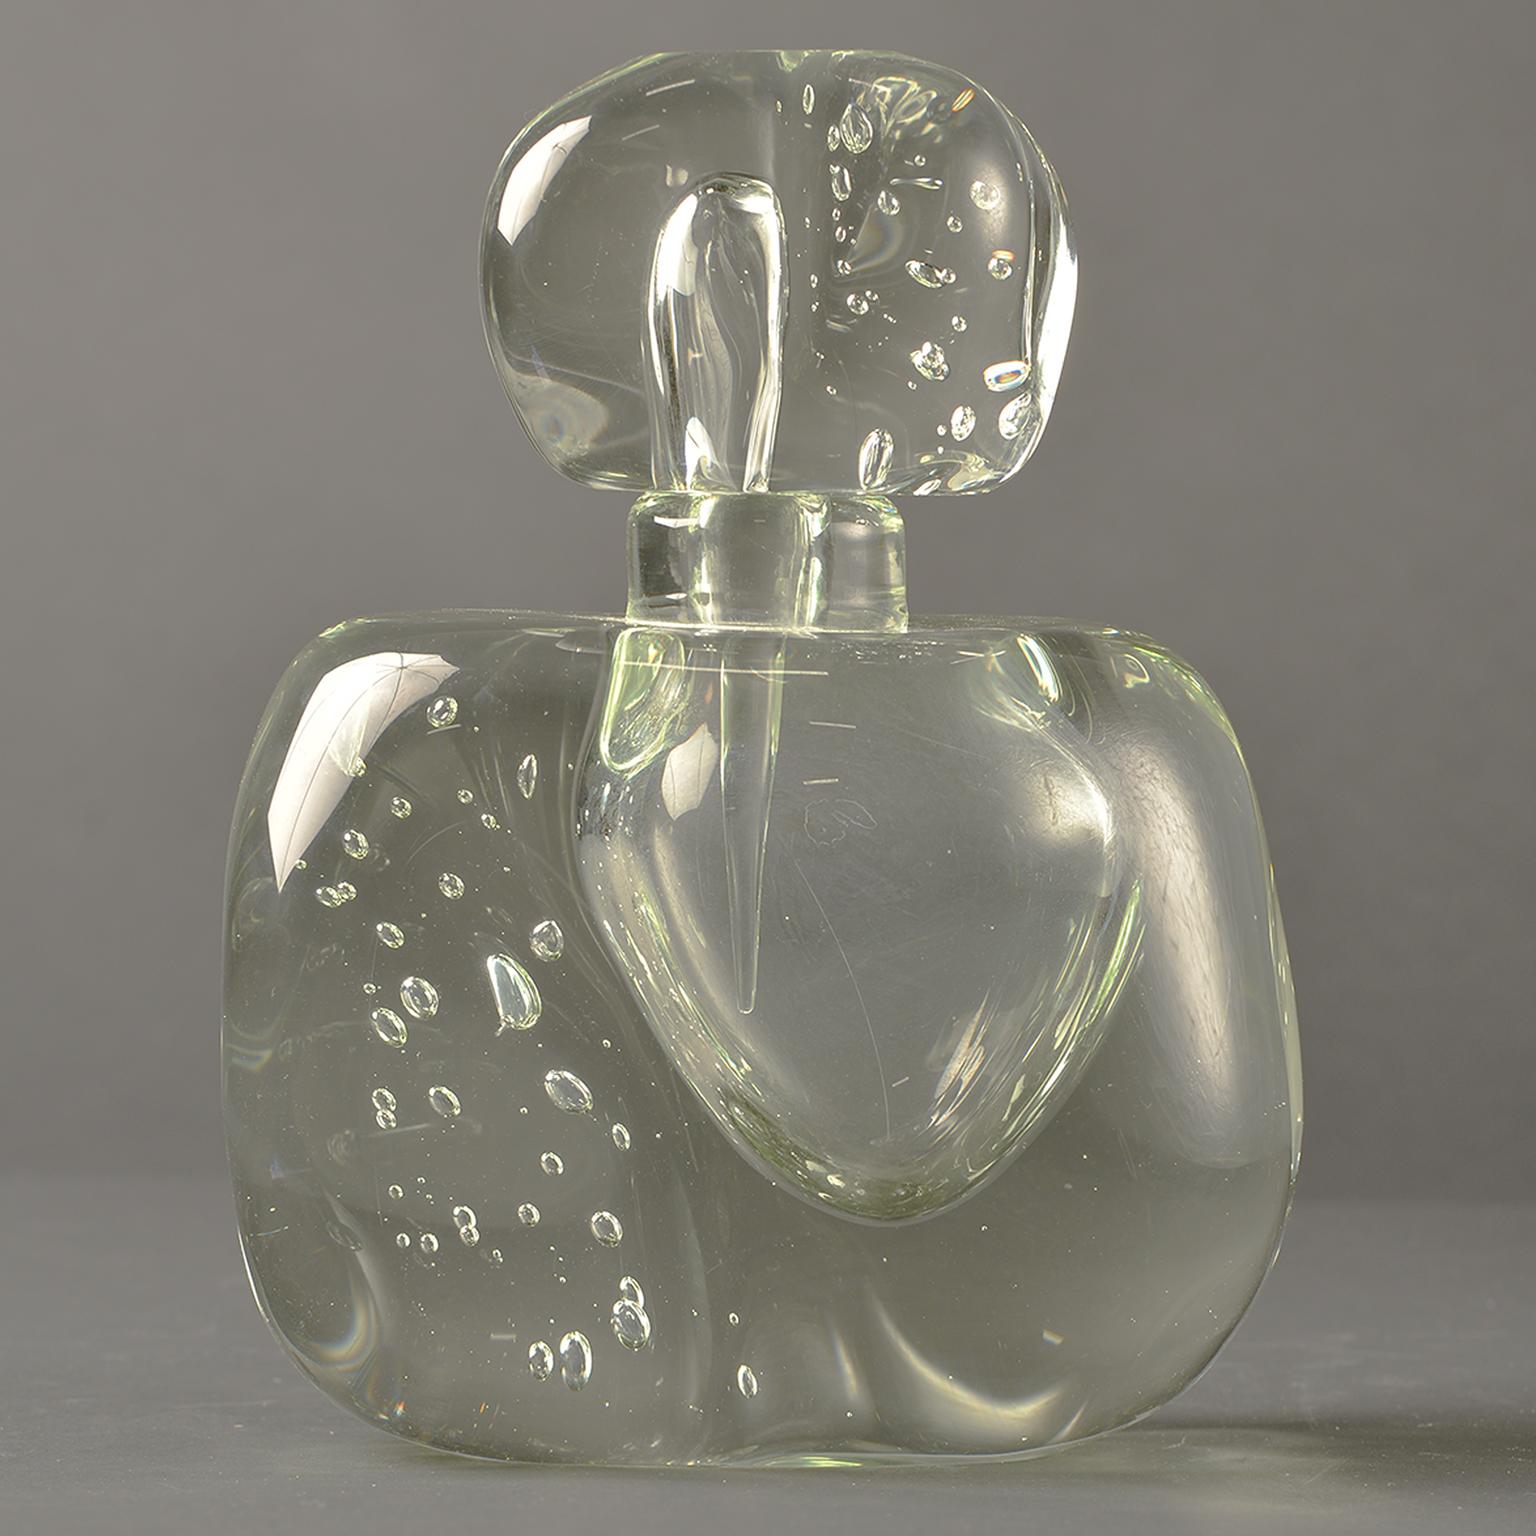 New handmade oversized Murano glass perfume bottle. Thick clear glass with bubbles. Large, clear stopper. Other perfume bottles in various shapes and colors also available at time of this posting.